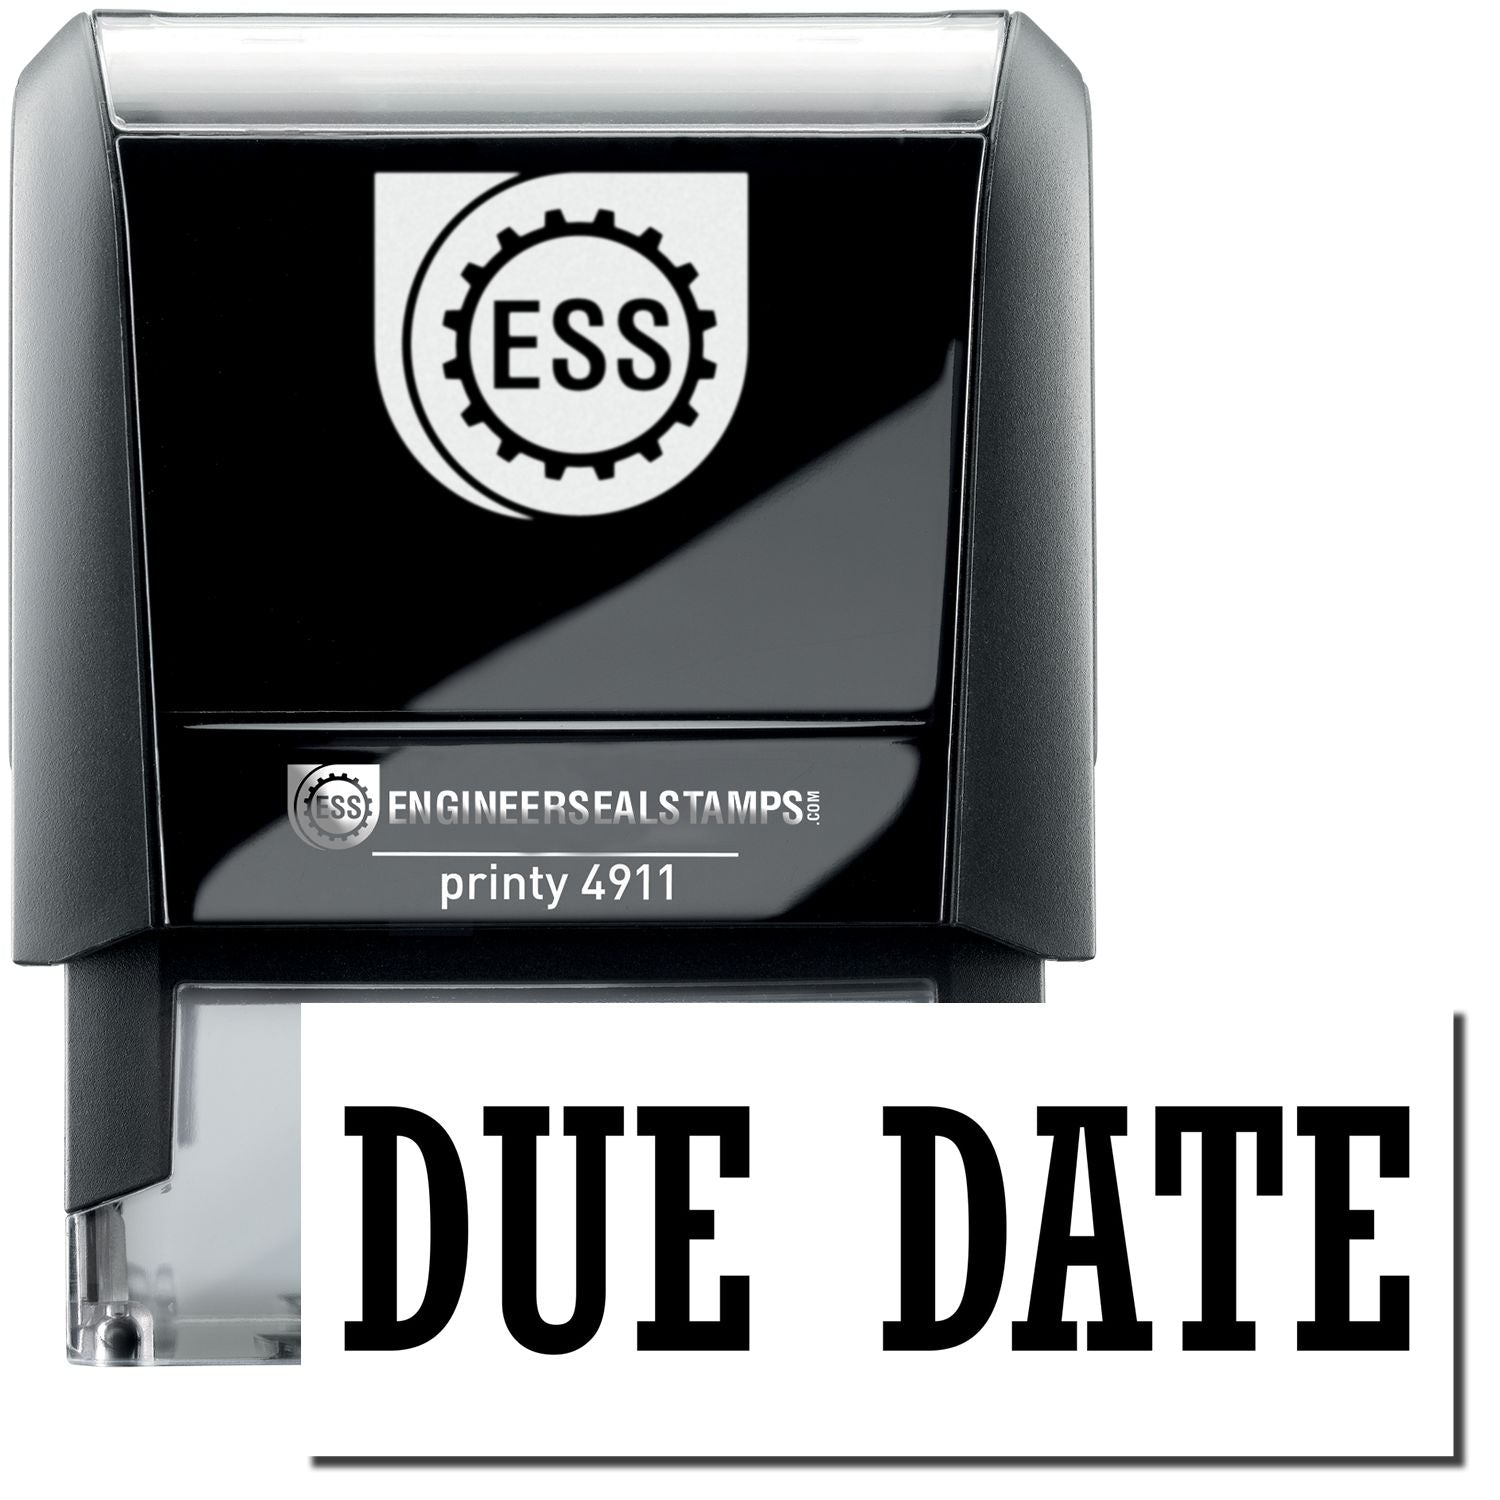 A self-inking stamp with a stamped image showing how the text "DUE DATE" is displayed after stamping.